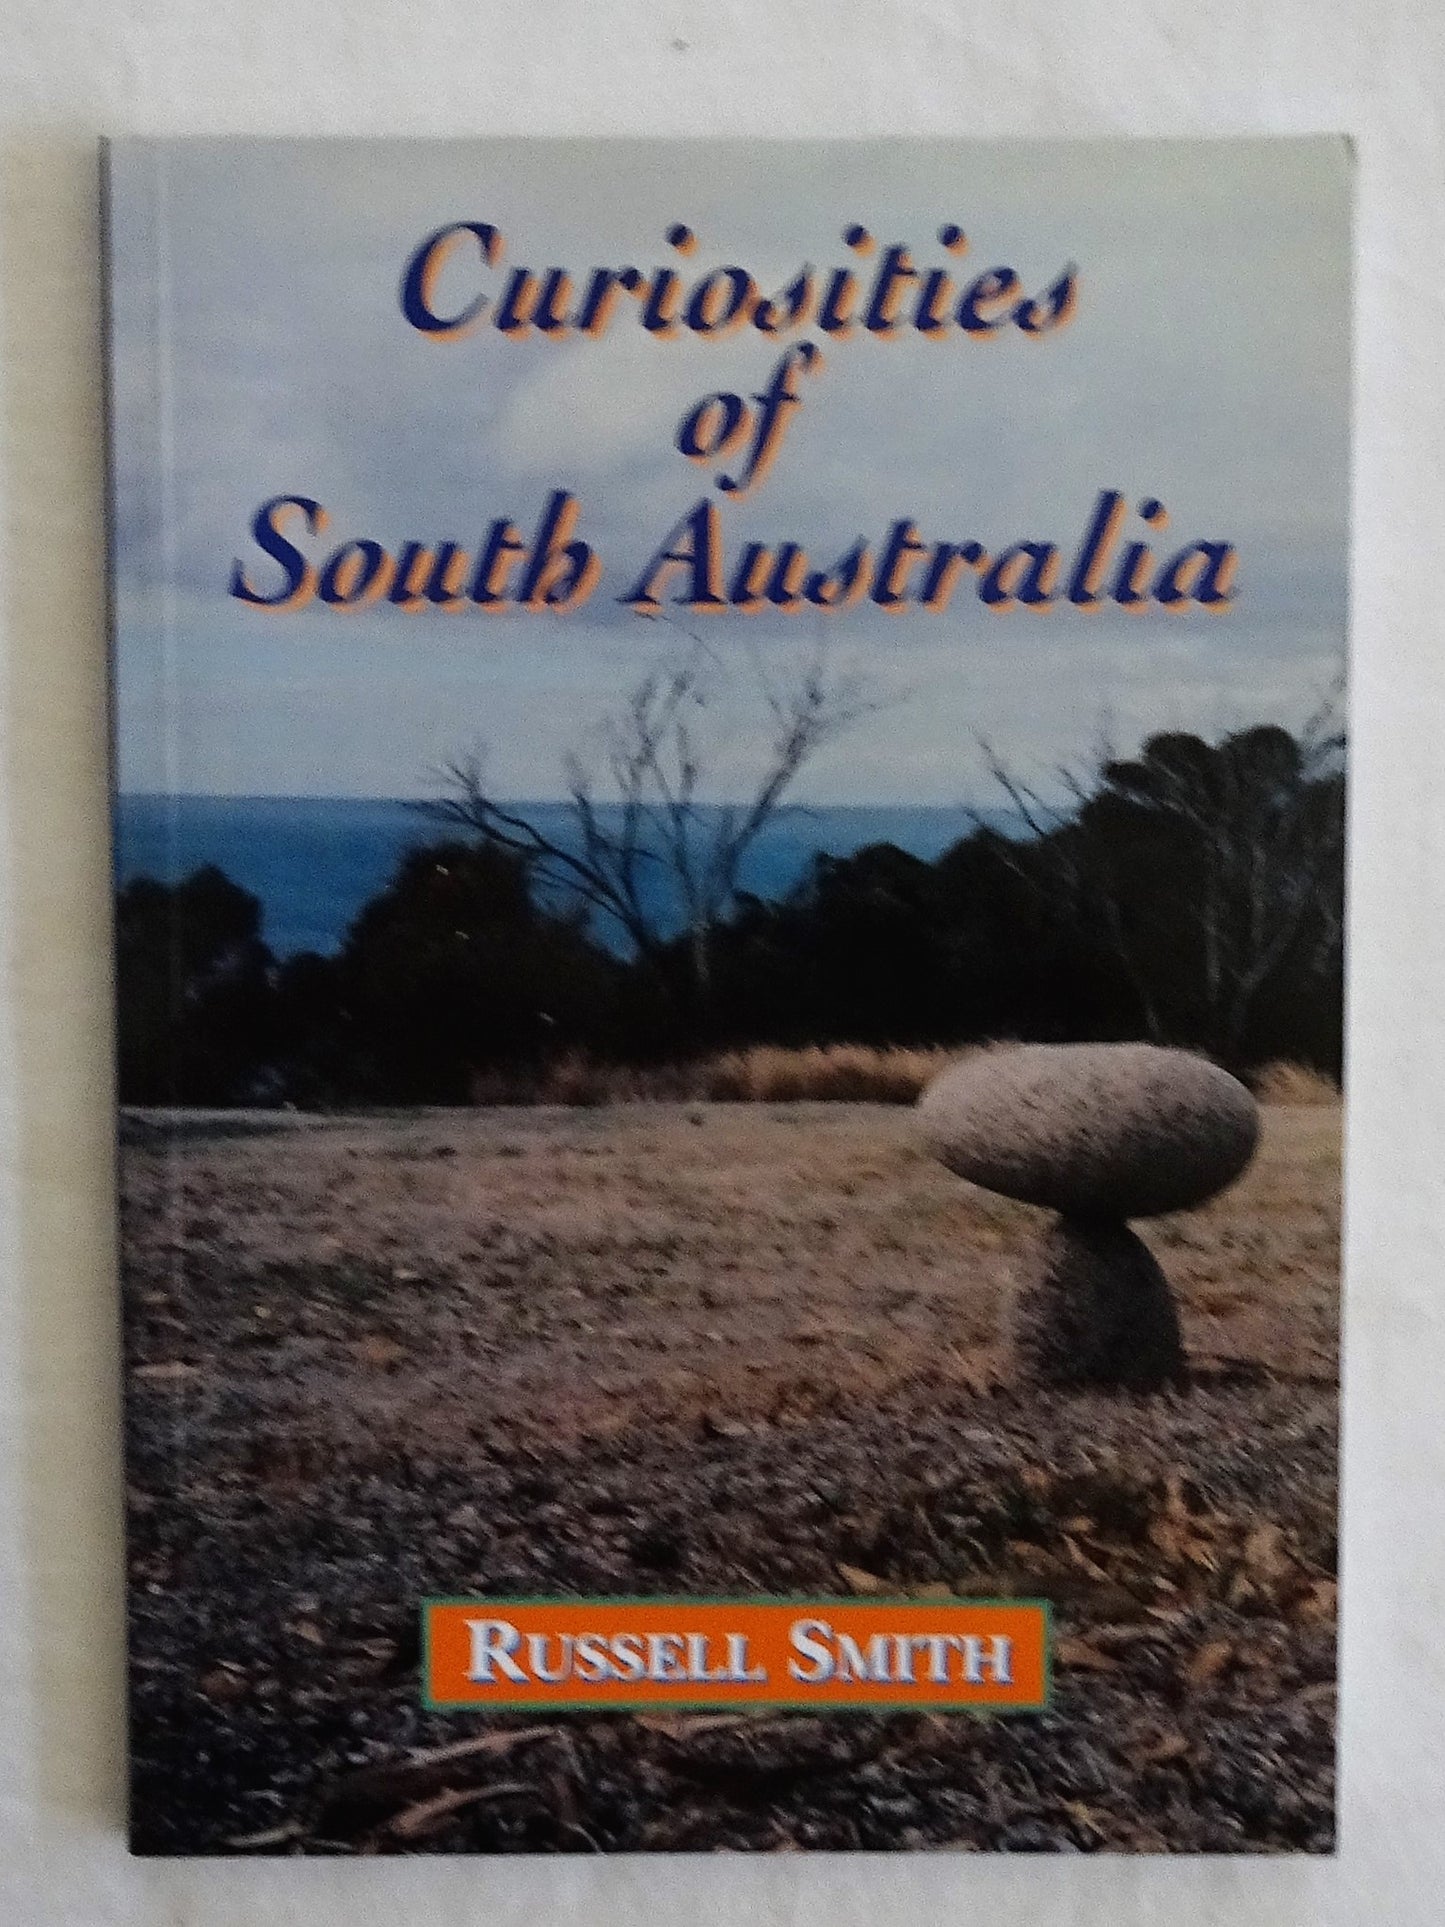 Curiosities of South Australia by Russell Smith